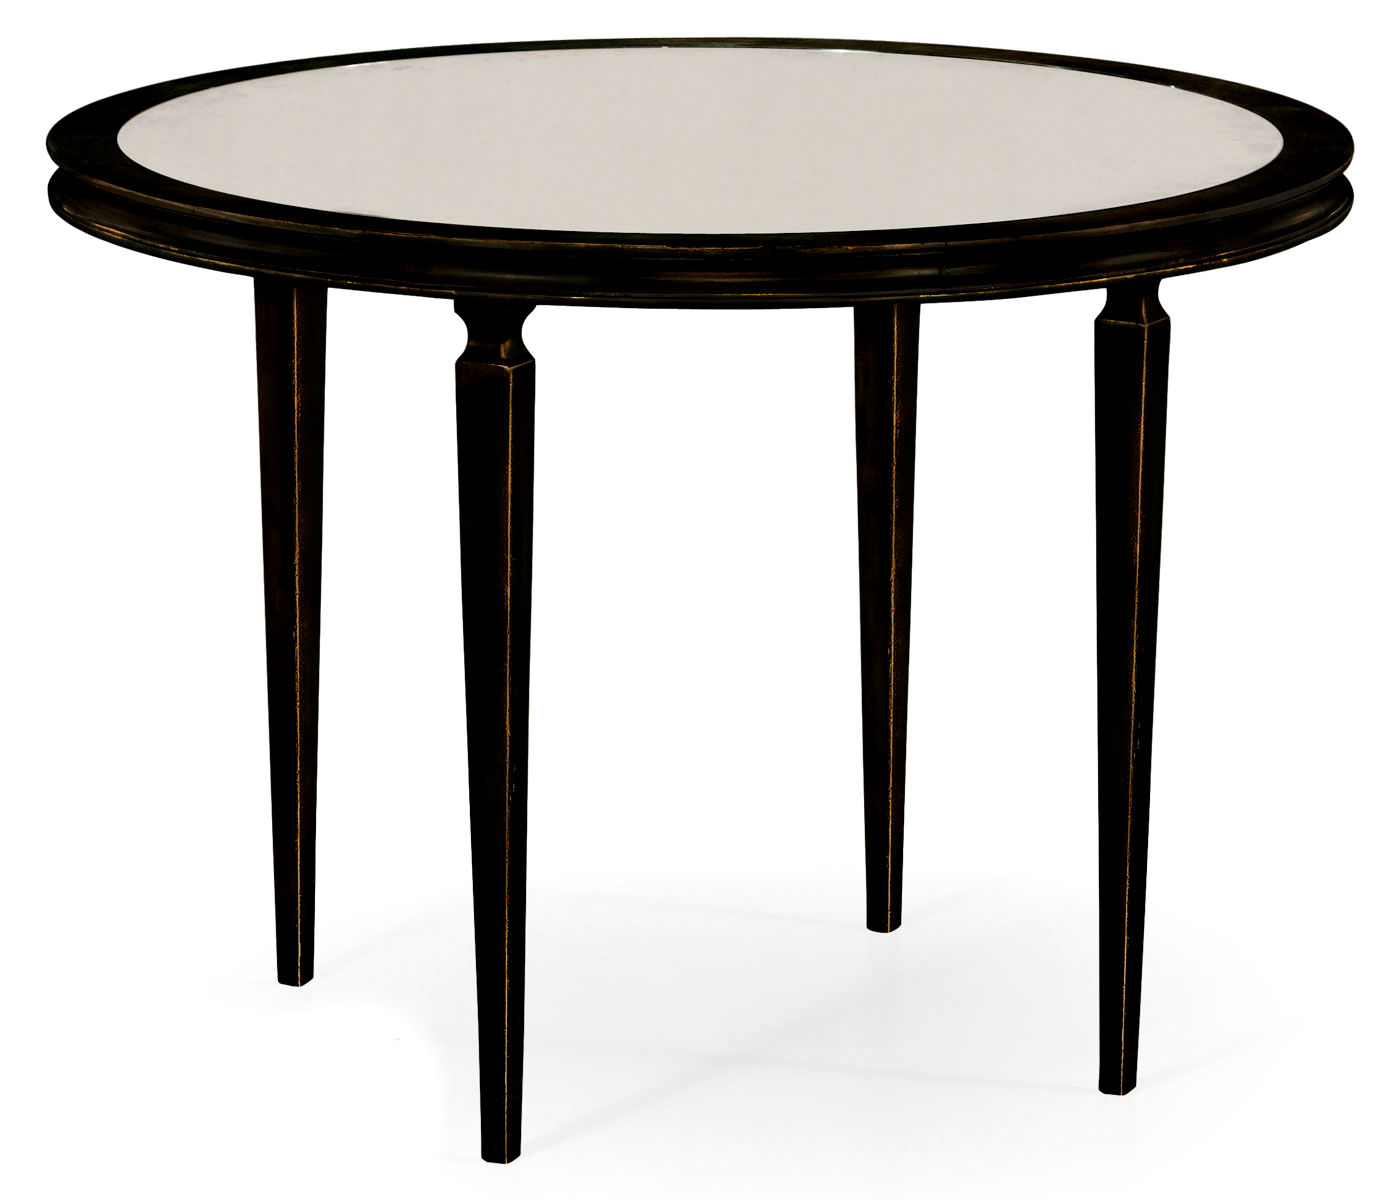 italian tables style bronze side antique accent table classic dia mirrored antiqued partner end console coffee available hospitality residential lucite dining chairs pipe asian